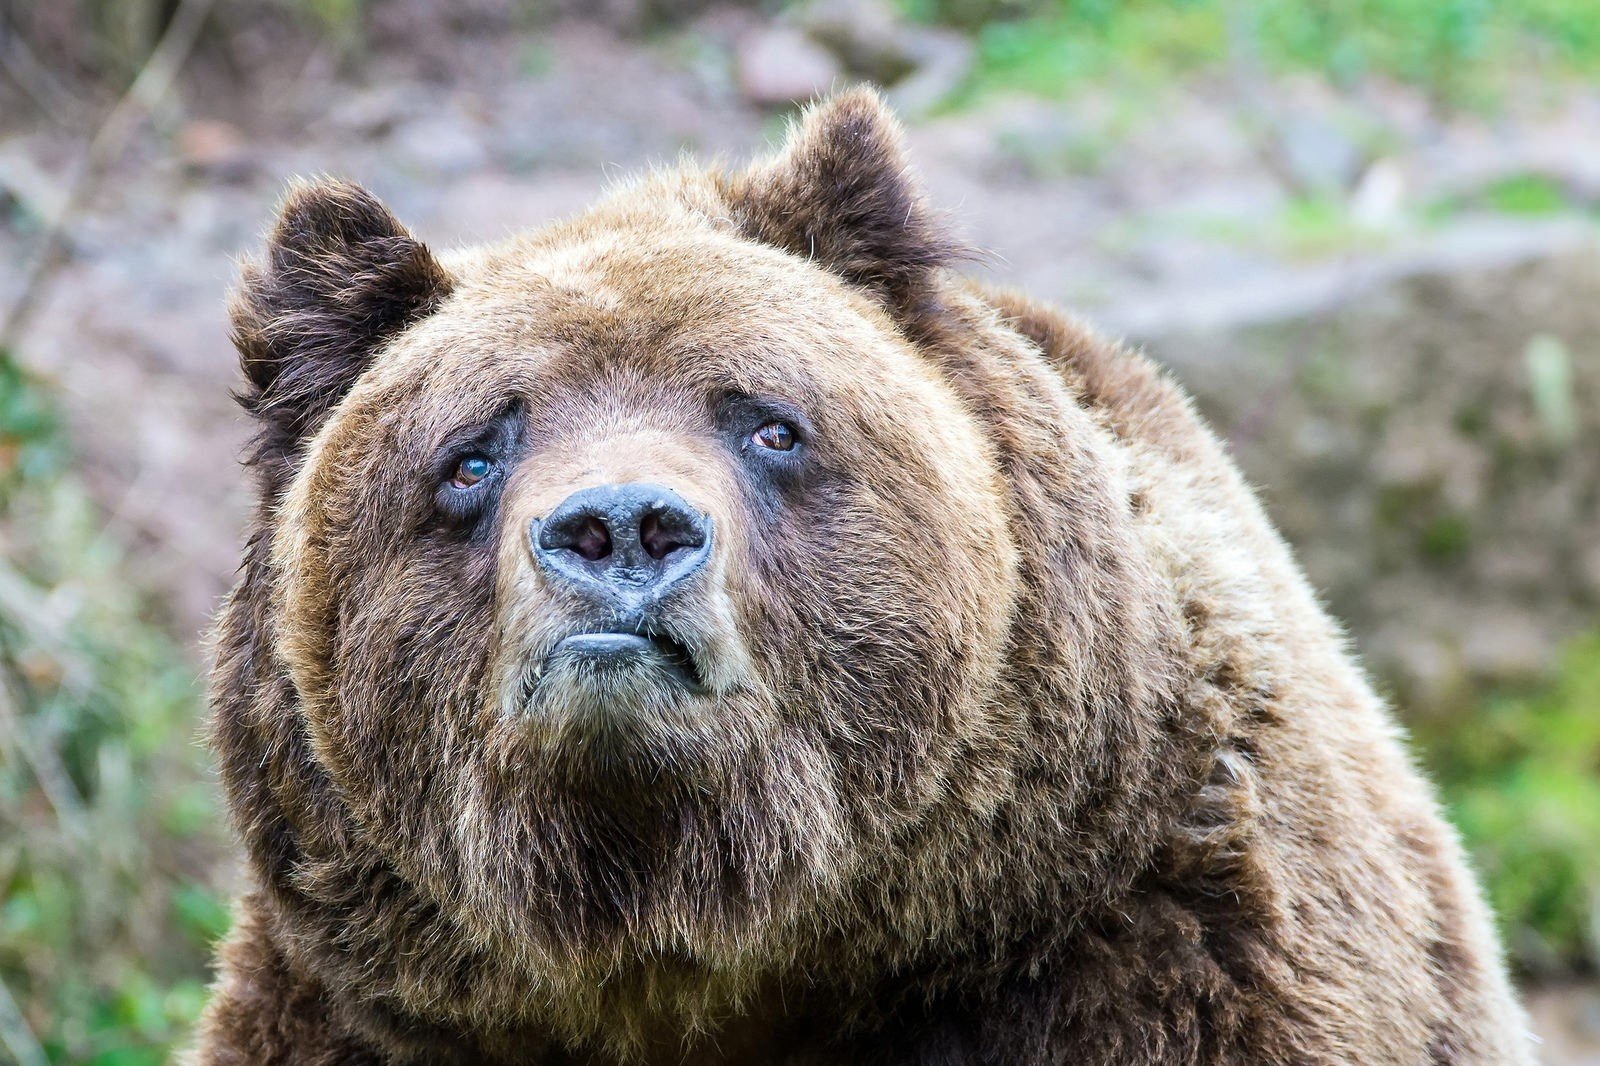 bears, Sadness, Grizzly bear, Brown bear, Grizzly Bears Wallpaper